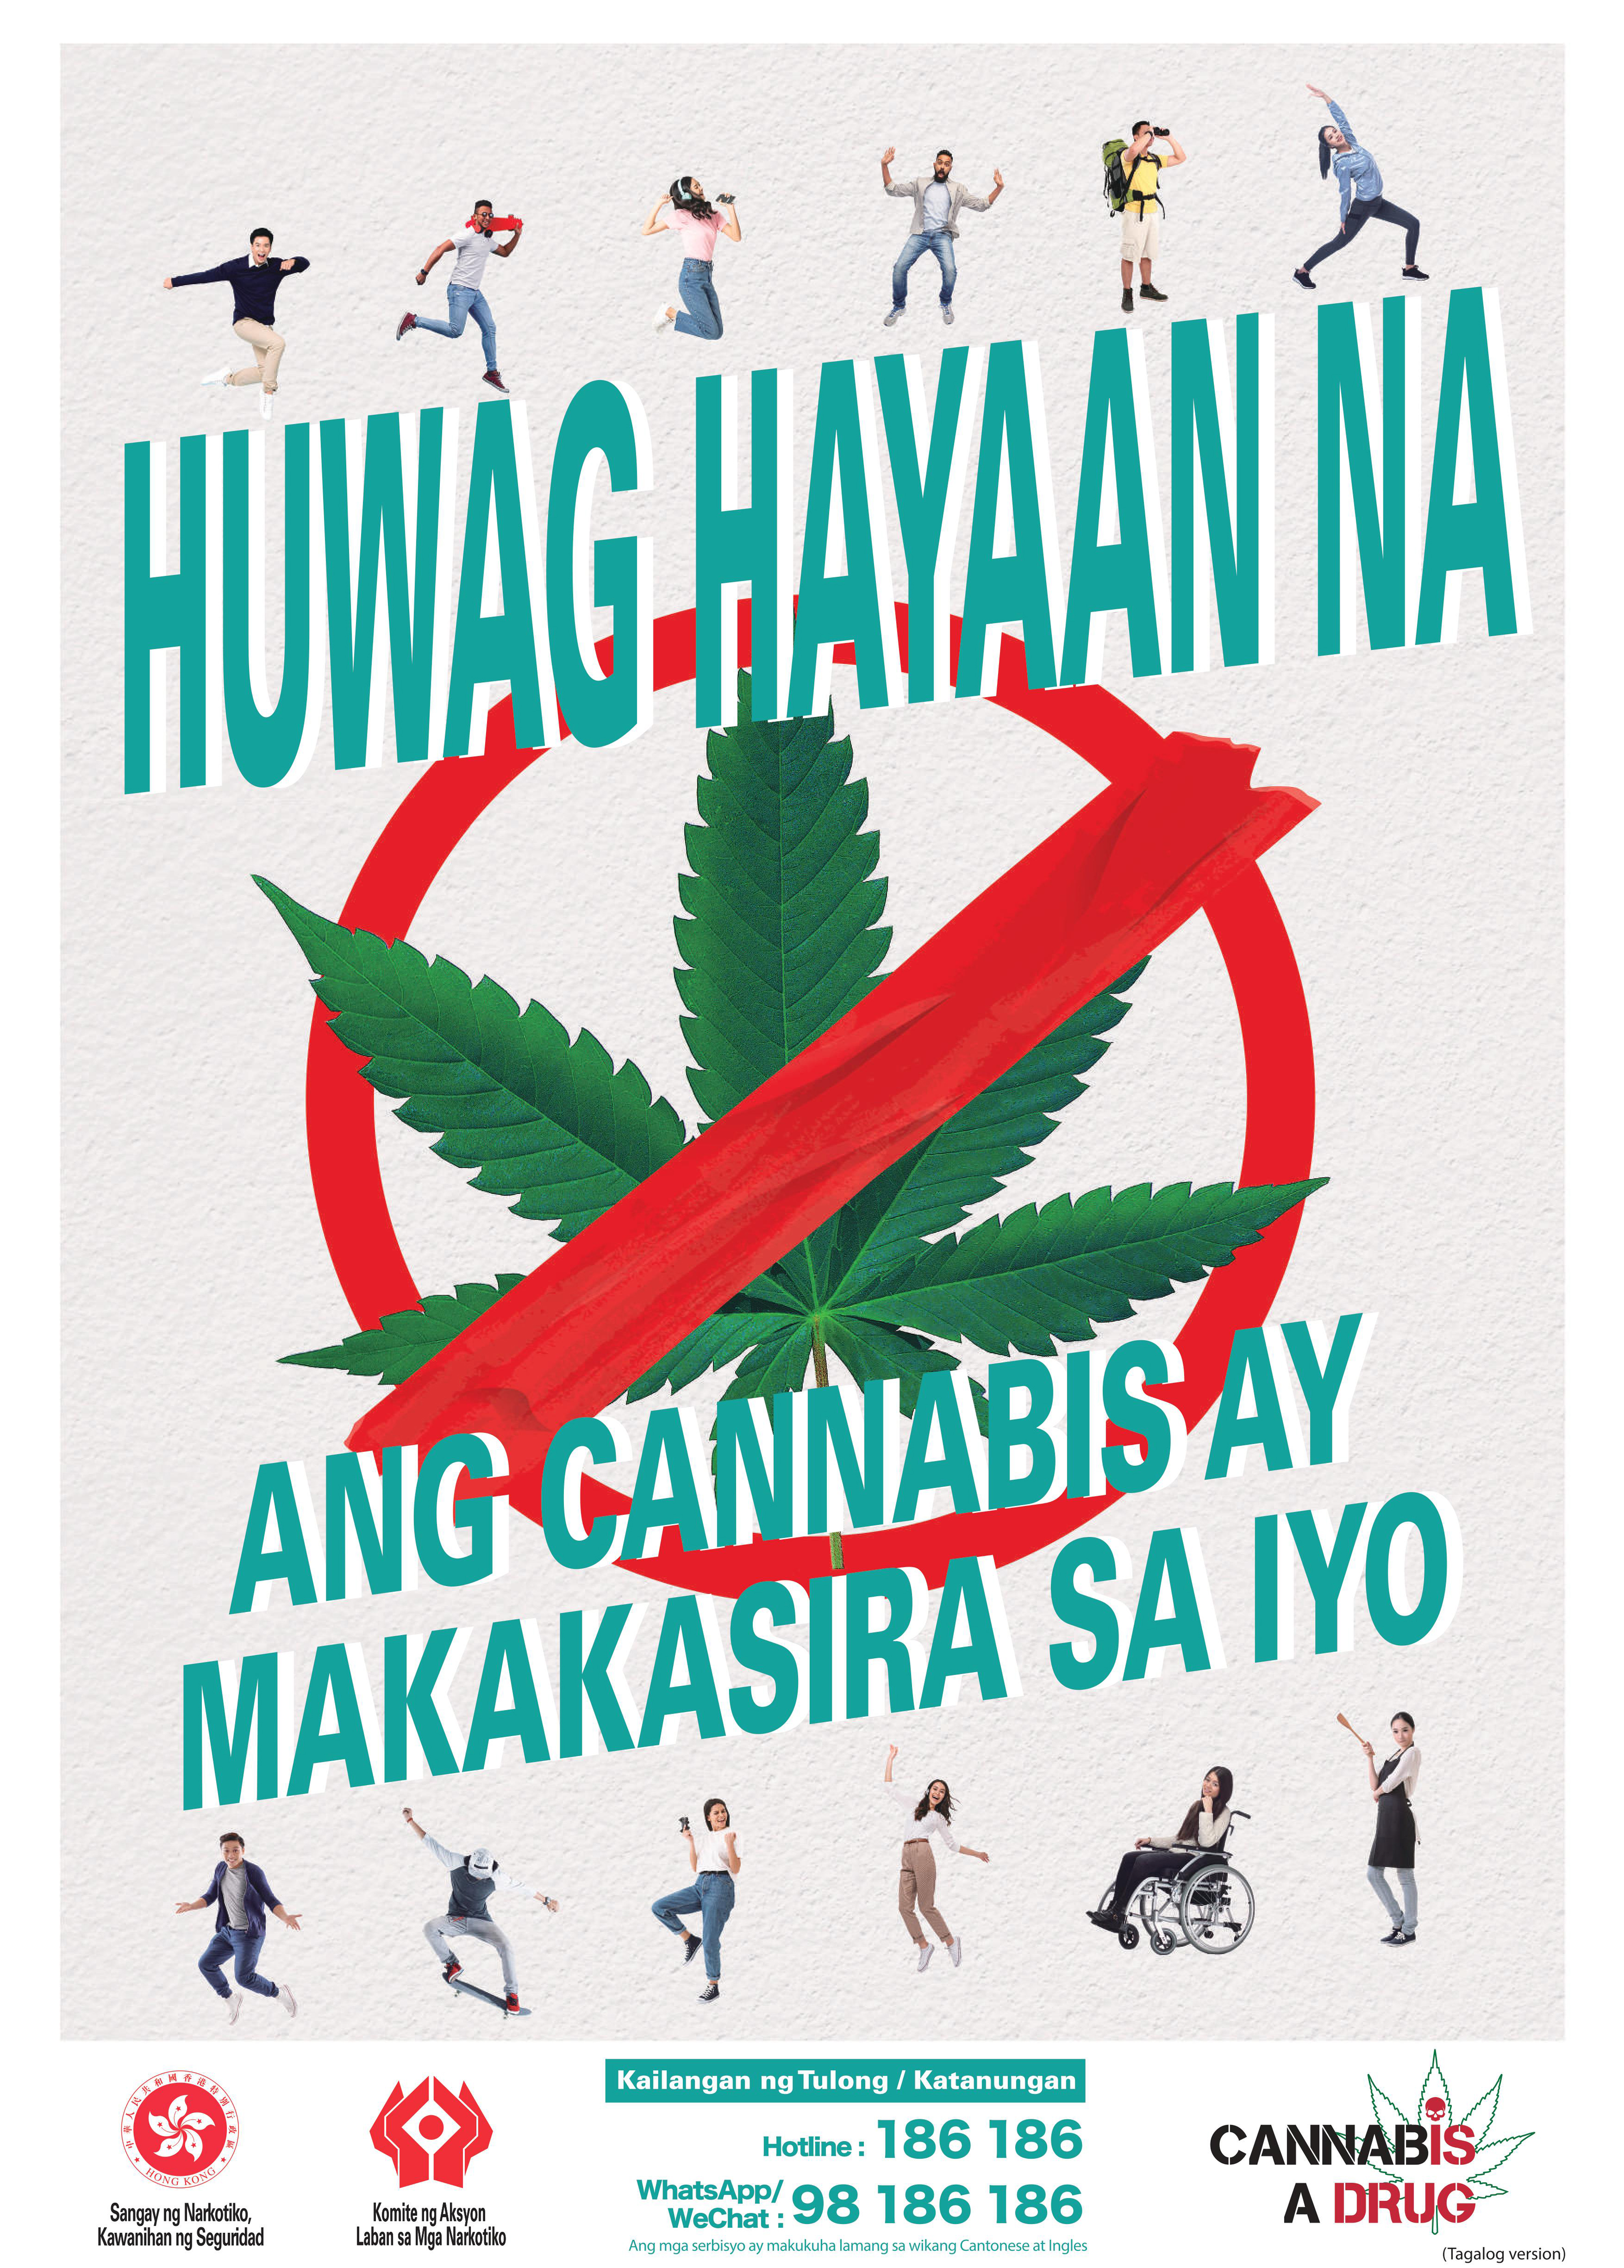 Anti-drug poster "Dont let cannabis ruin you" - Tagalog version